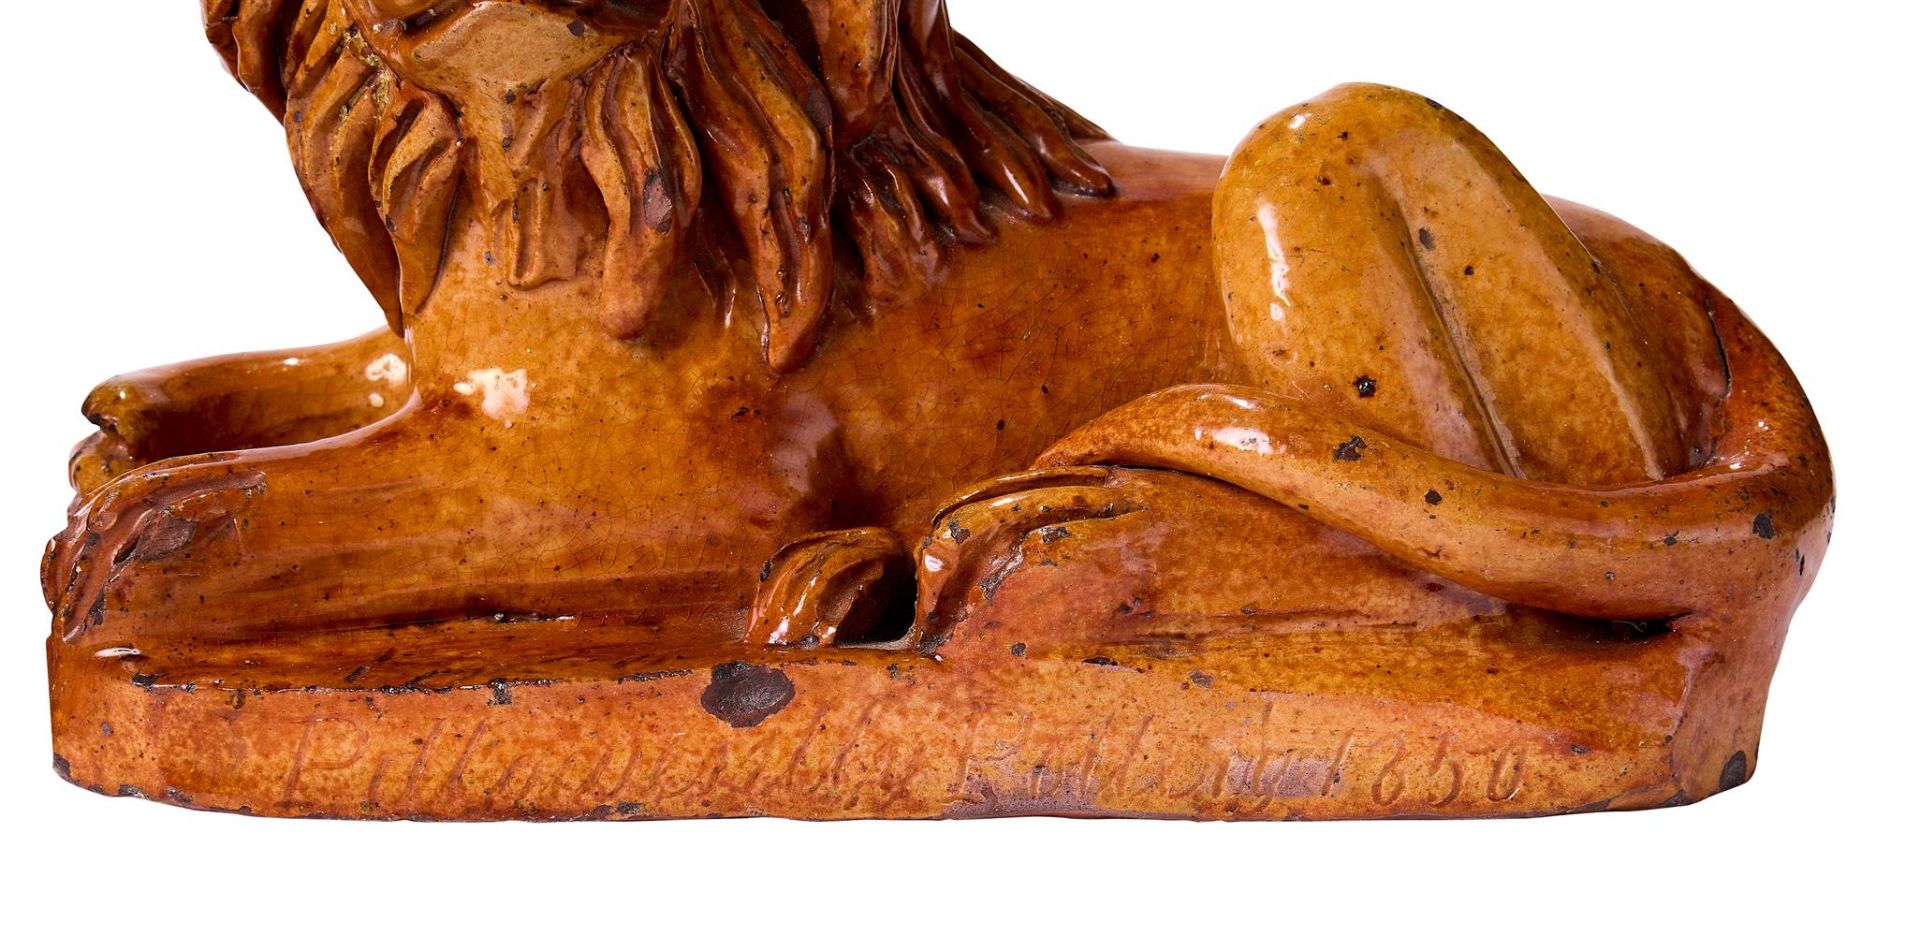 A MATCHED PAIR OF PILL POTTERY (NEWPORT MONMOUTHSHIRE) TREACLE-GLAZED RED POTTERY RECUMBENT LIONS - Image 2 of 3